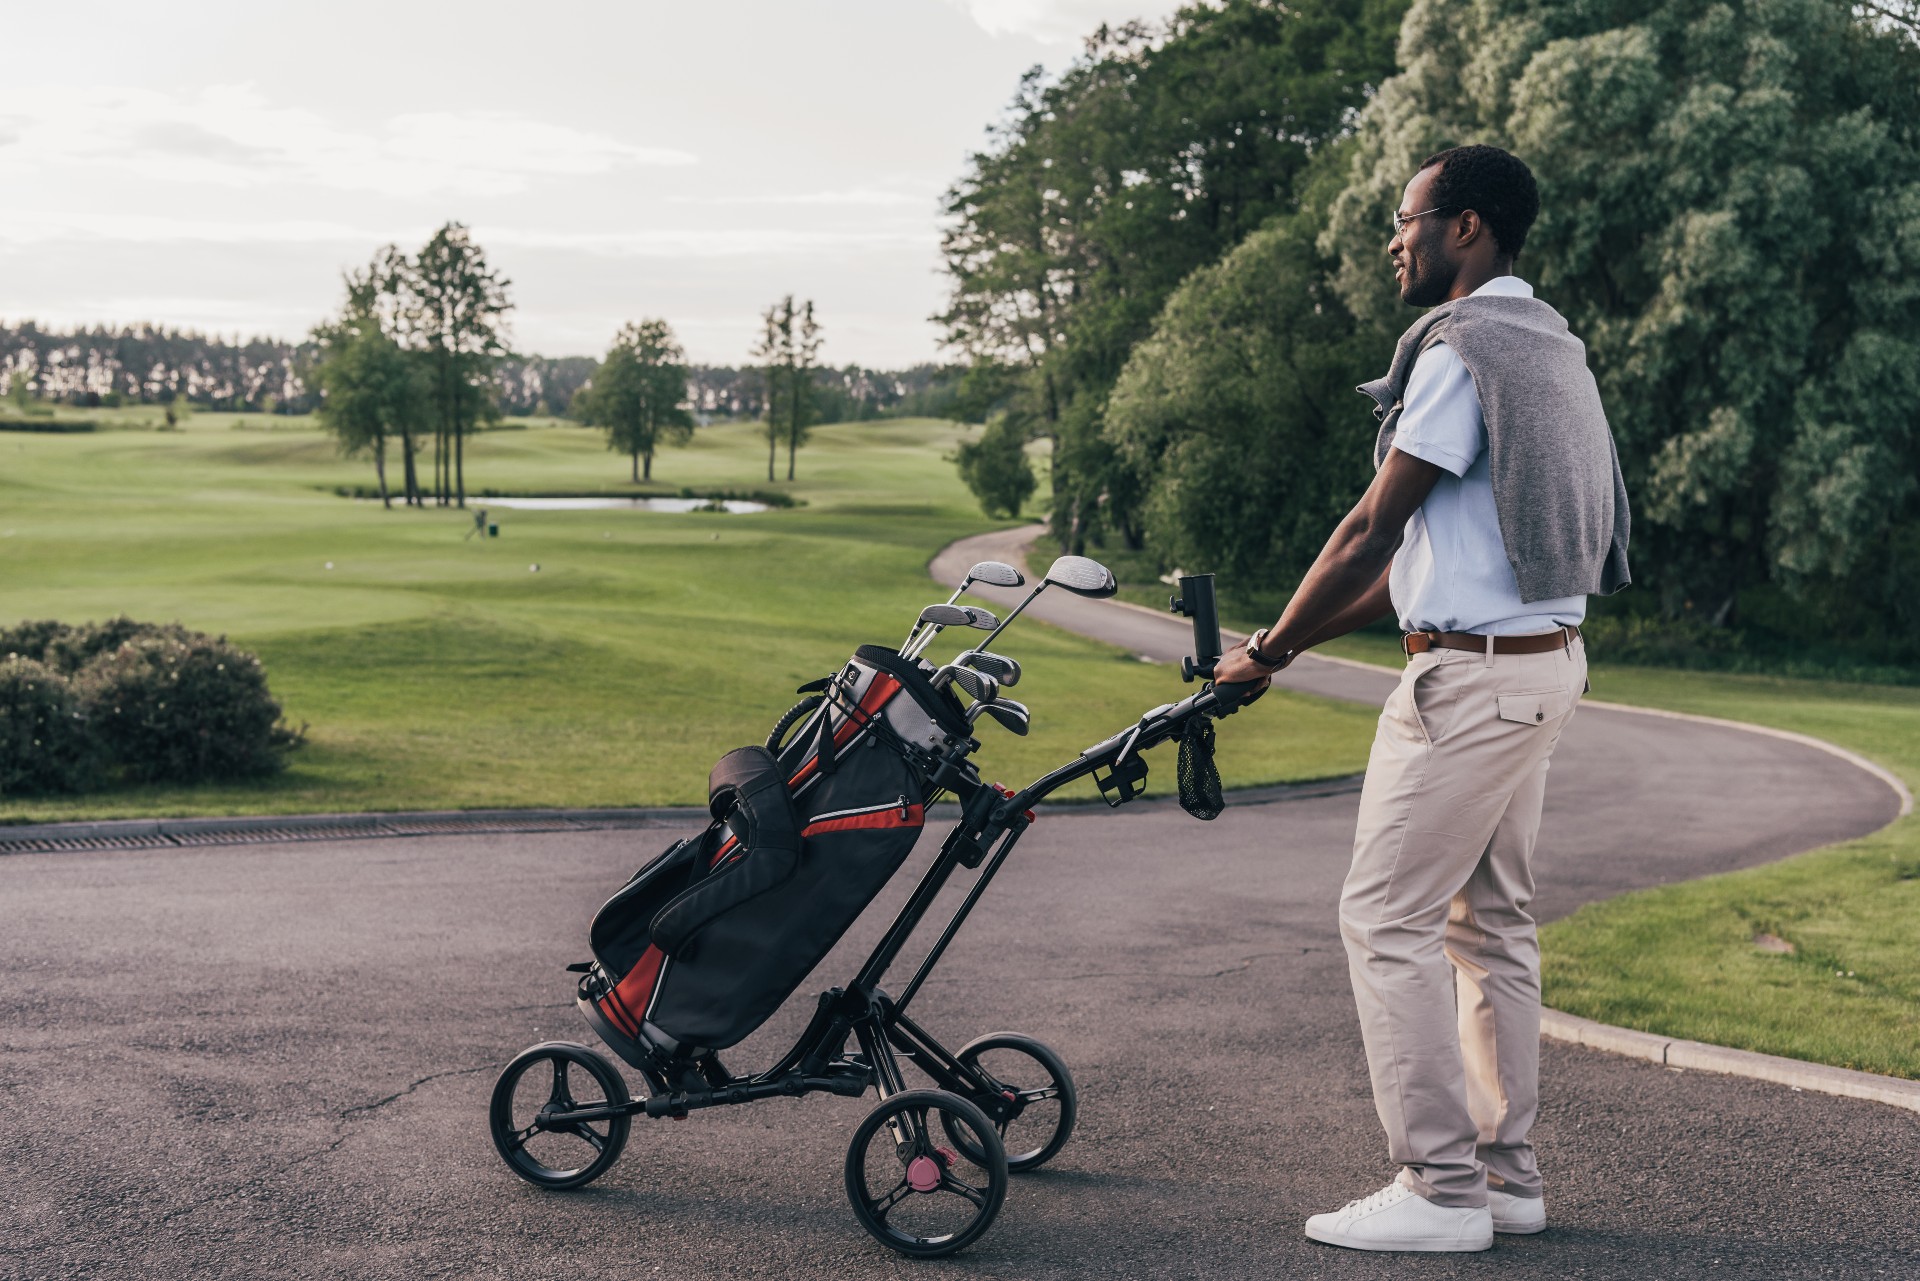 Picture of a man with golf tour bag on a golf course